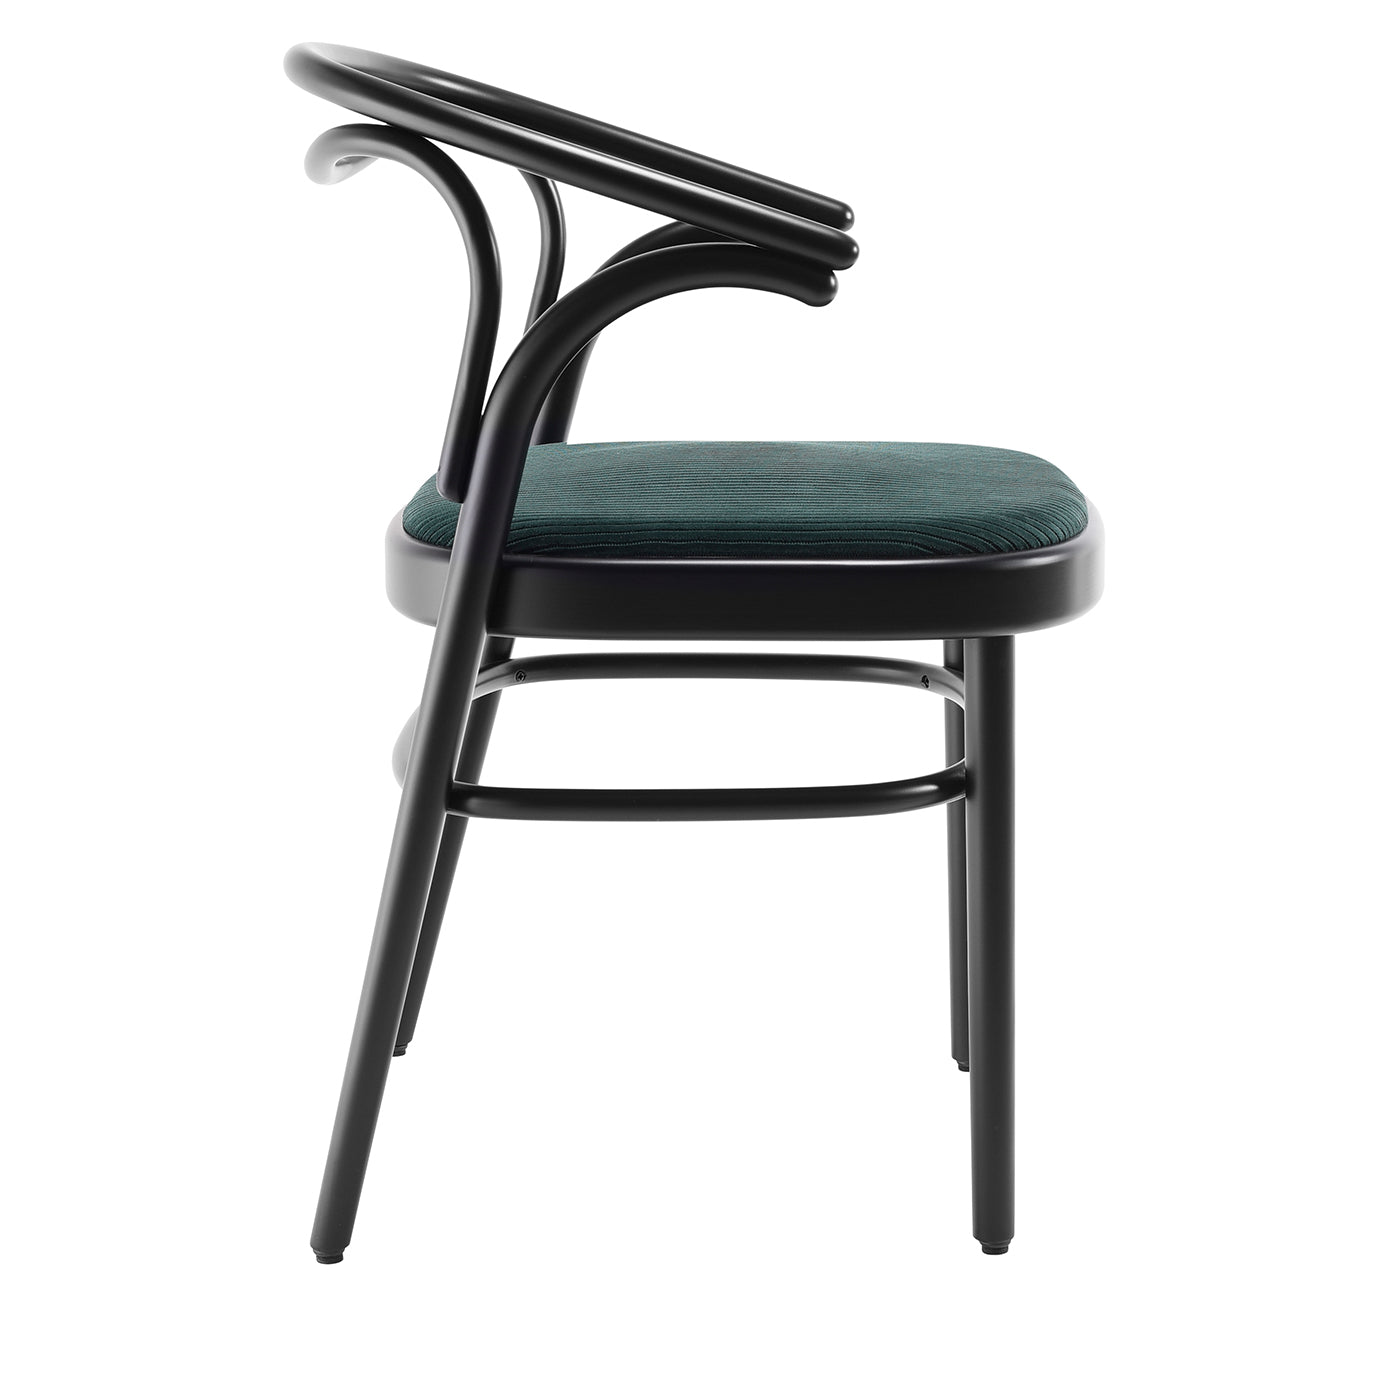 BEAULIEU dining chair with upholstered seat by PHILIPPE NIGRO - Alternative view 2